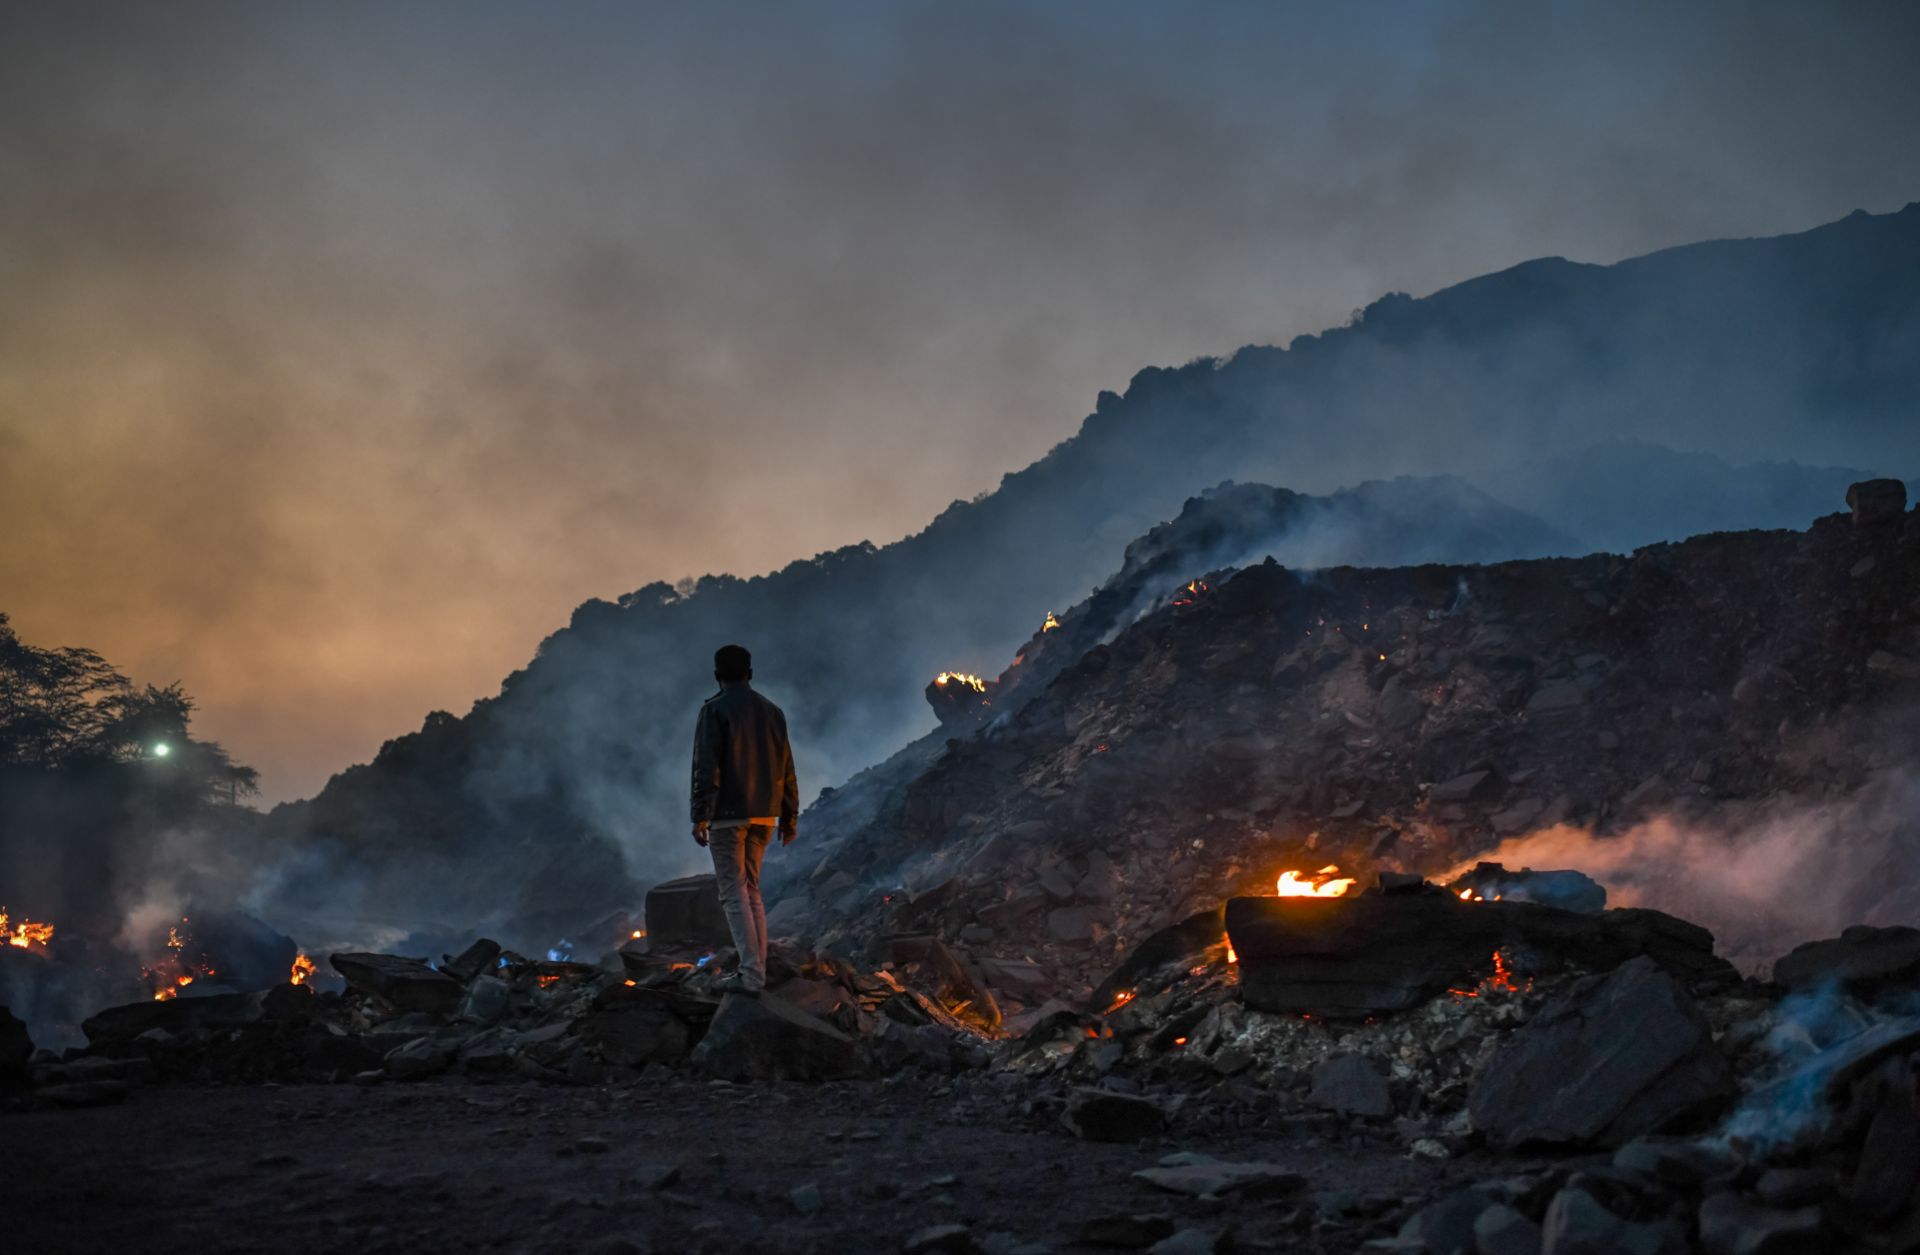 A man stands near burning waste at a coal mine in Sonbhadra, India, on Nov. 22, 2021. High oil and gas prices amid the war in Ukraine risks making India, the world’s second-largest coal consumer, even more reliant on the cheapest (and dirtiest) fossil fuel.